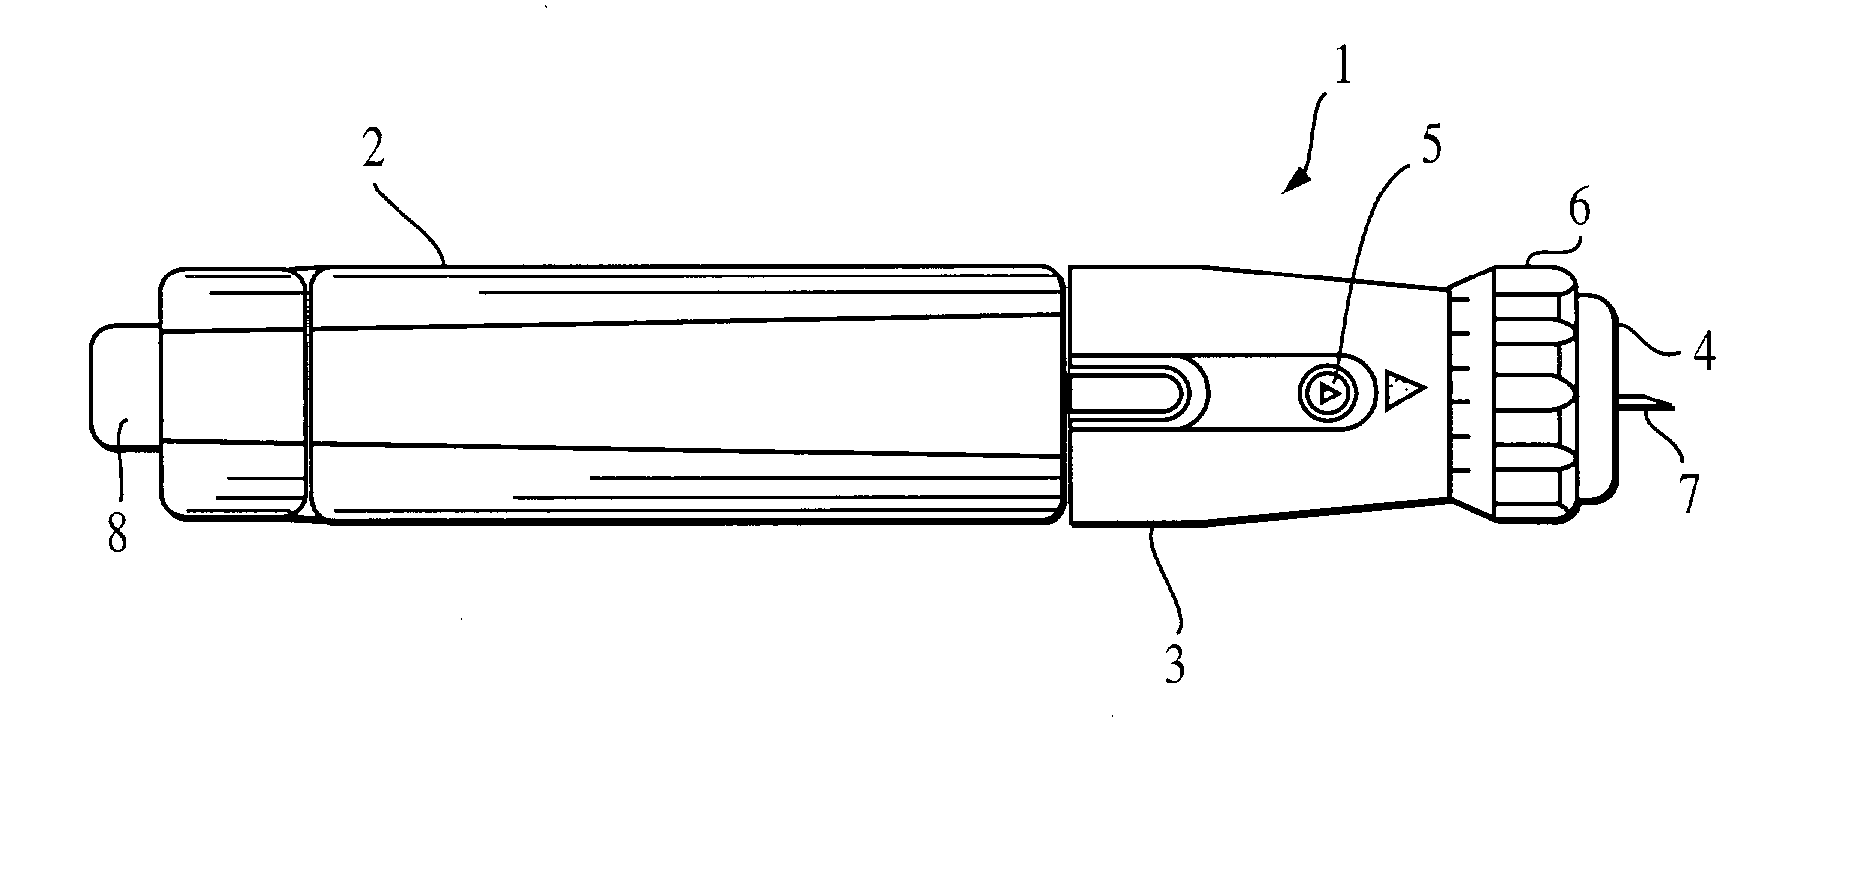 Adjustable tip for a lancet device and method